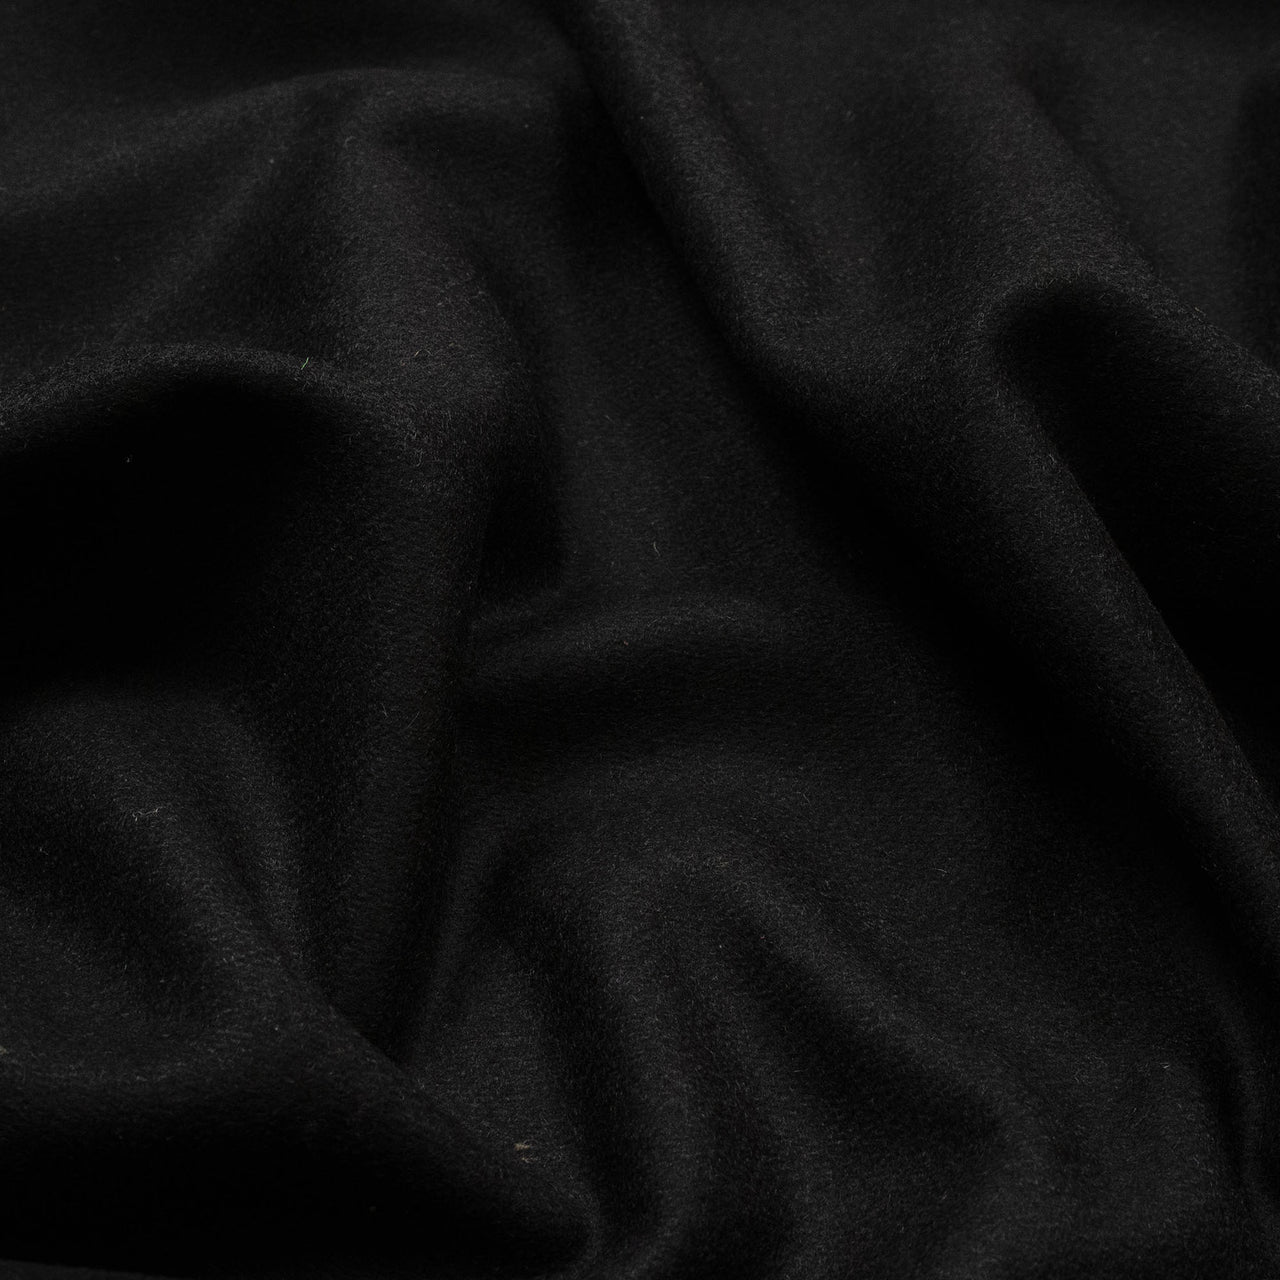 Black - Melton Wool Fabric -  Soft and Warm Fabric for Coats, Clothing and Blankets